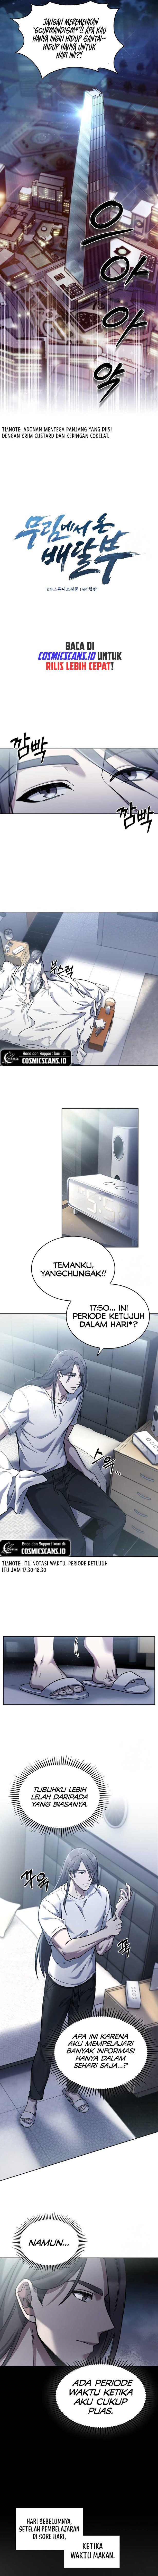 The Delivery Man From Murim Chapter 07